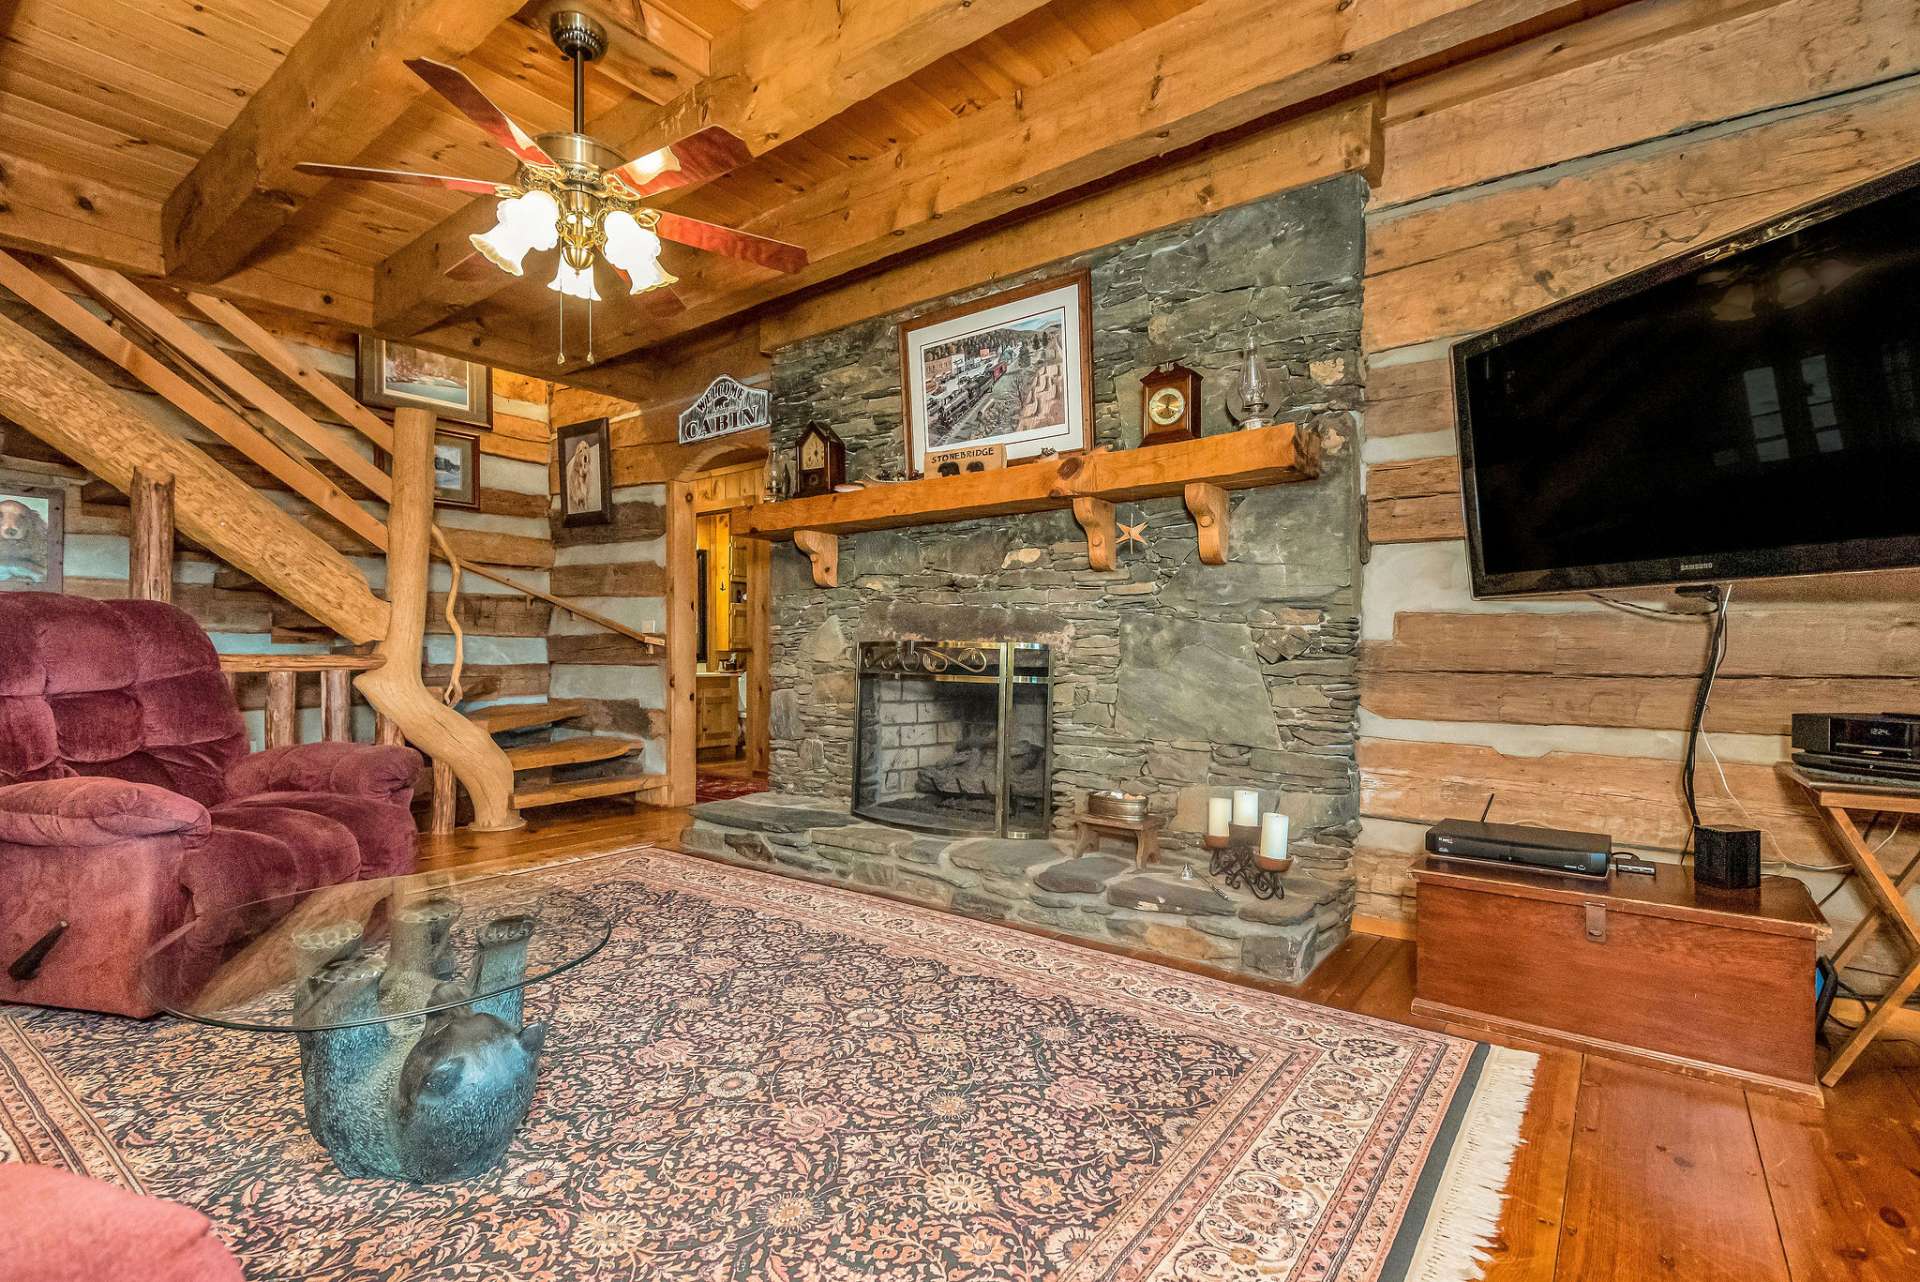 This is one of four stone fireplaces in this alluring log home.